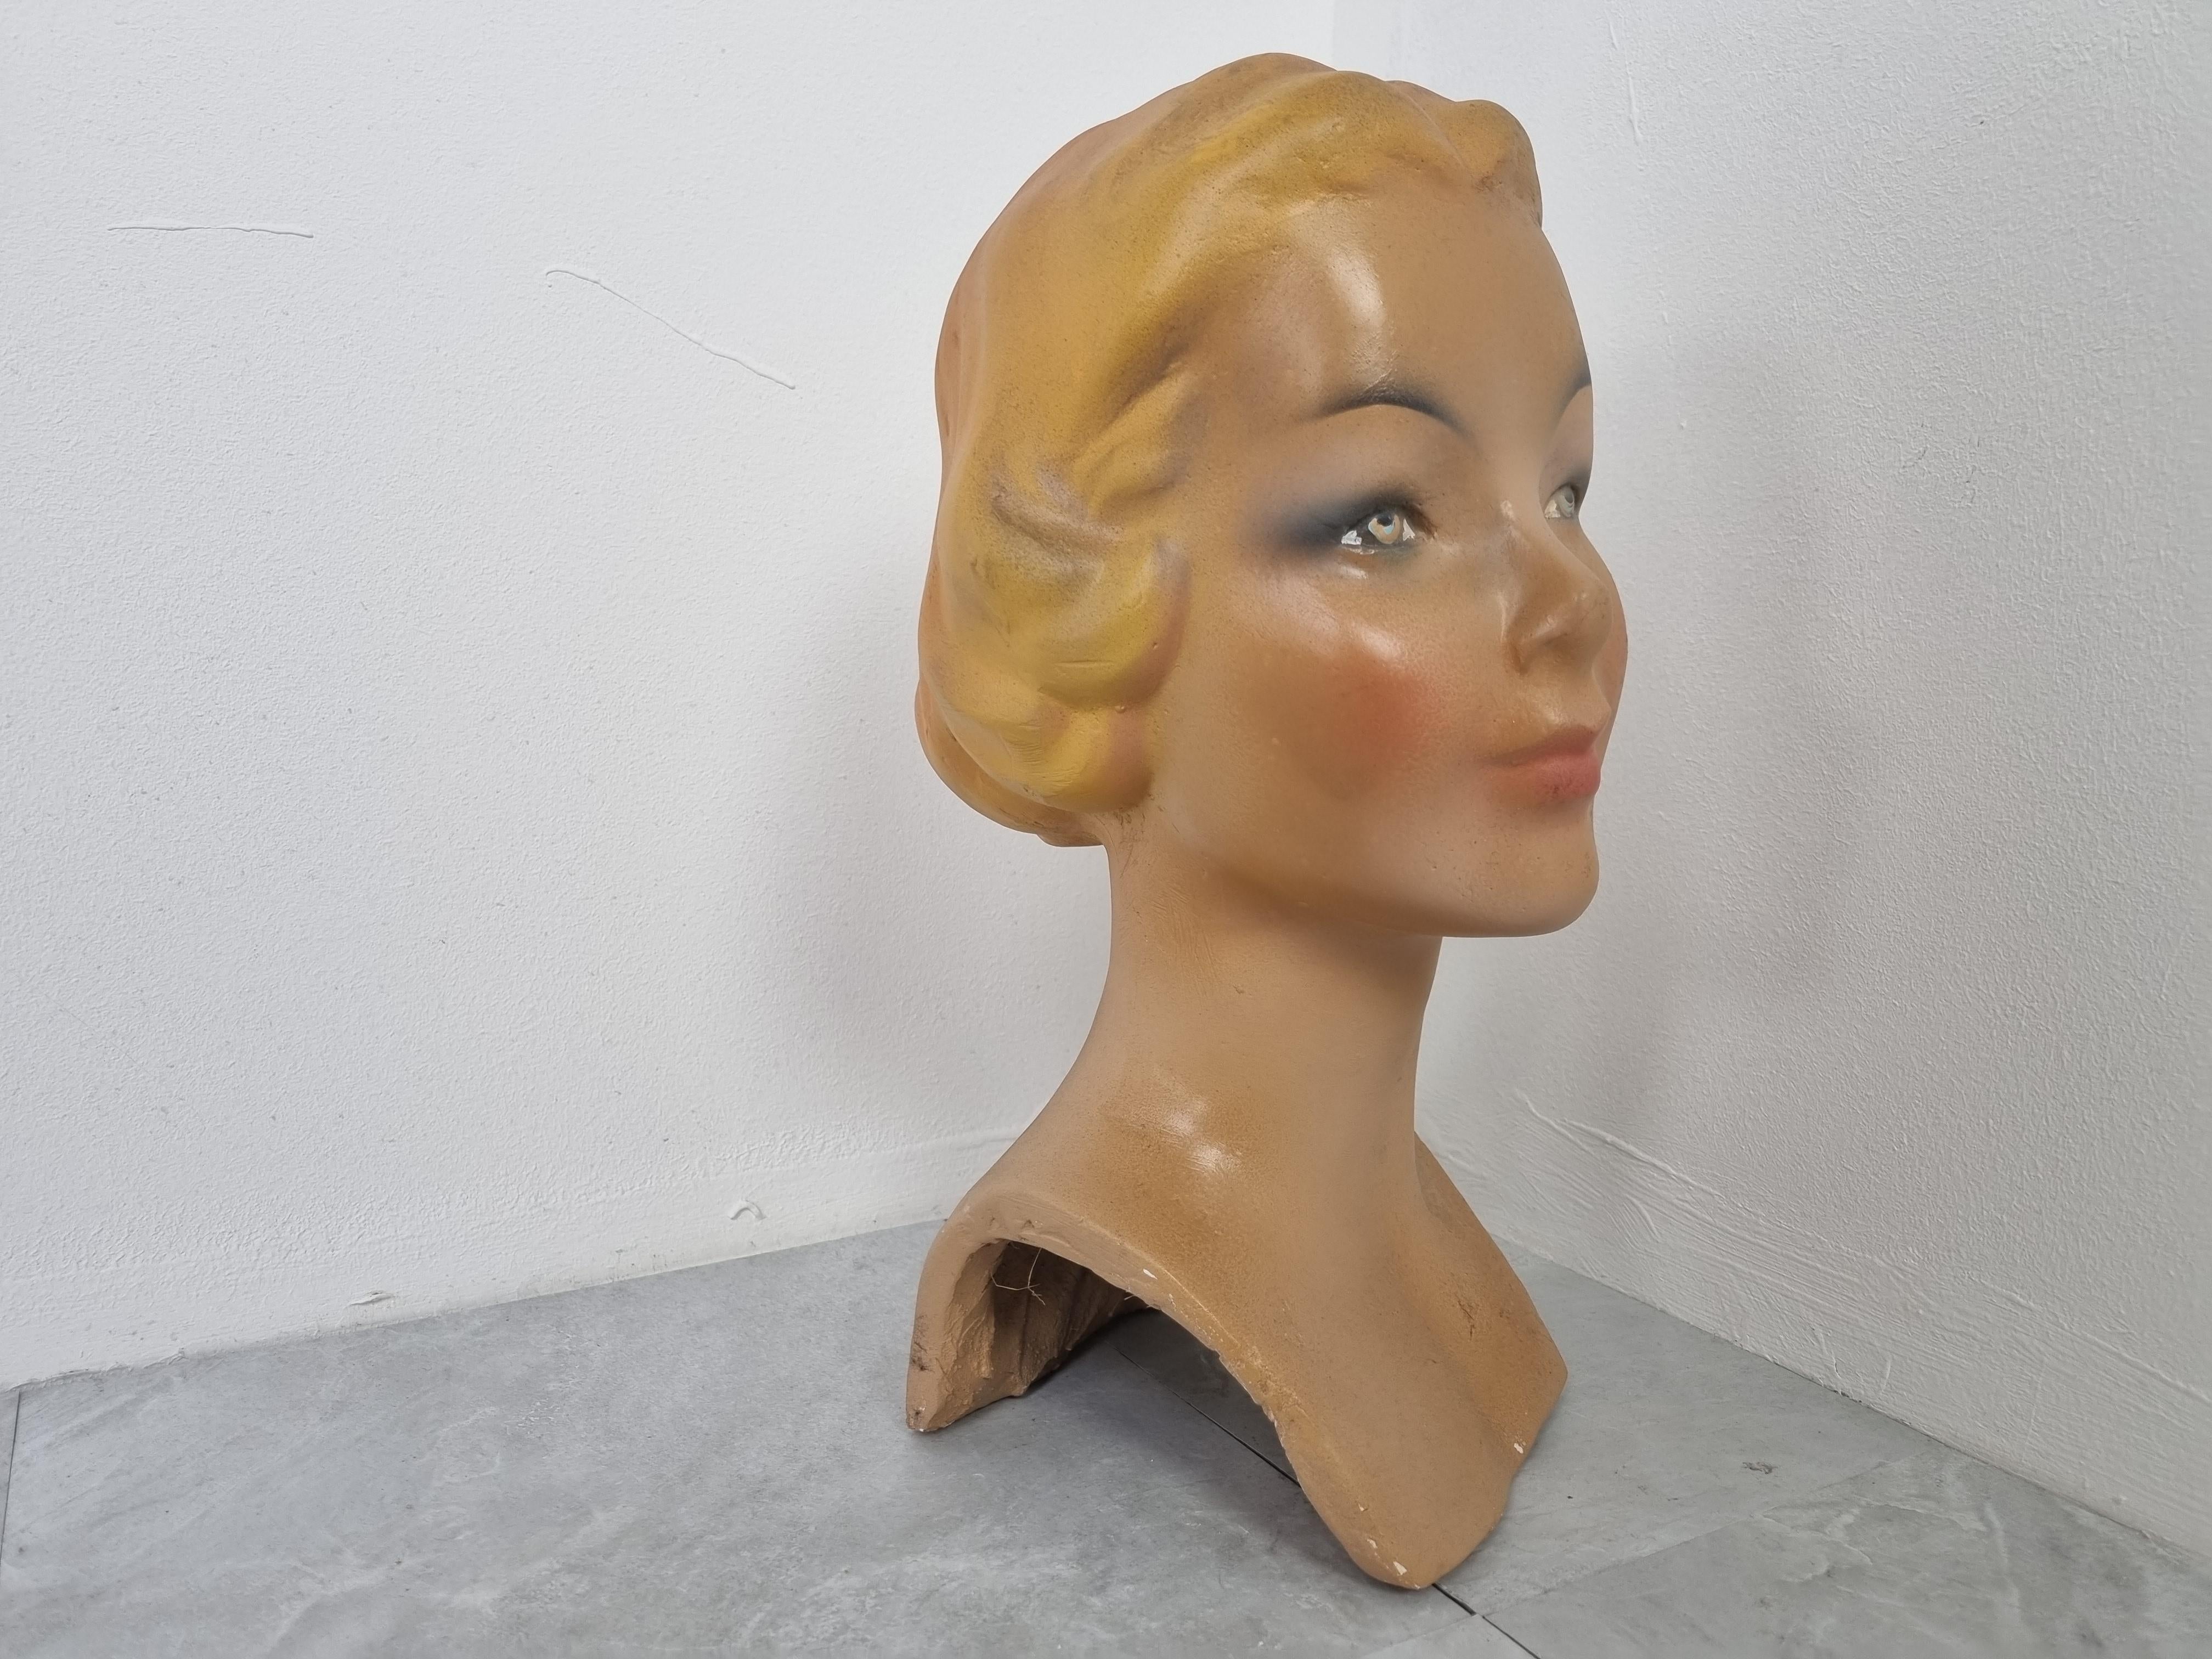 Beautiful female mannequin head made from plaster serving as an advertising bust in a shop.

It was used to be displayed at a shopcounter or vitrine.

Comes from a lot acquired from a clothes shop that stopped activities.

Great decorative